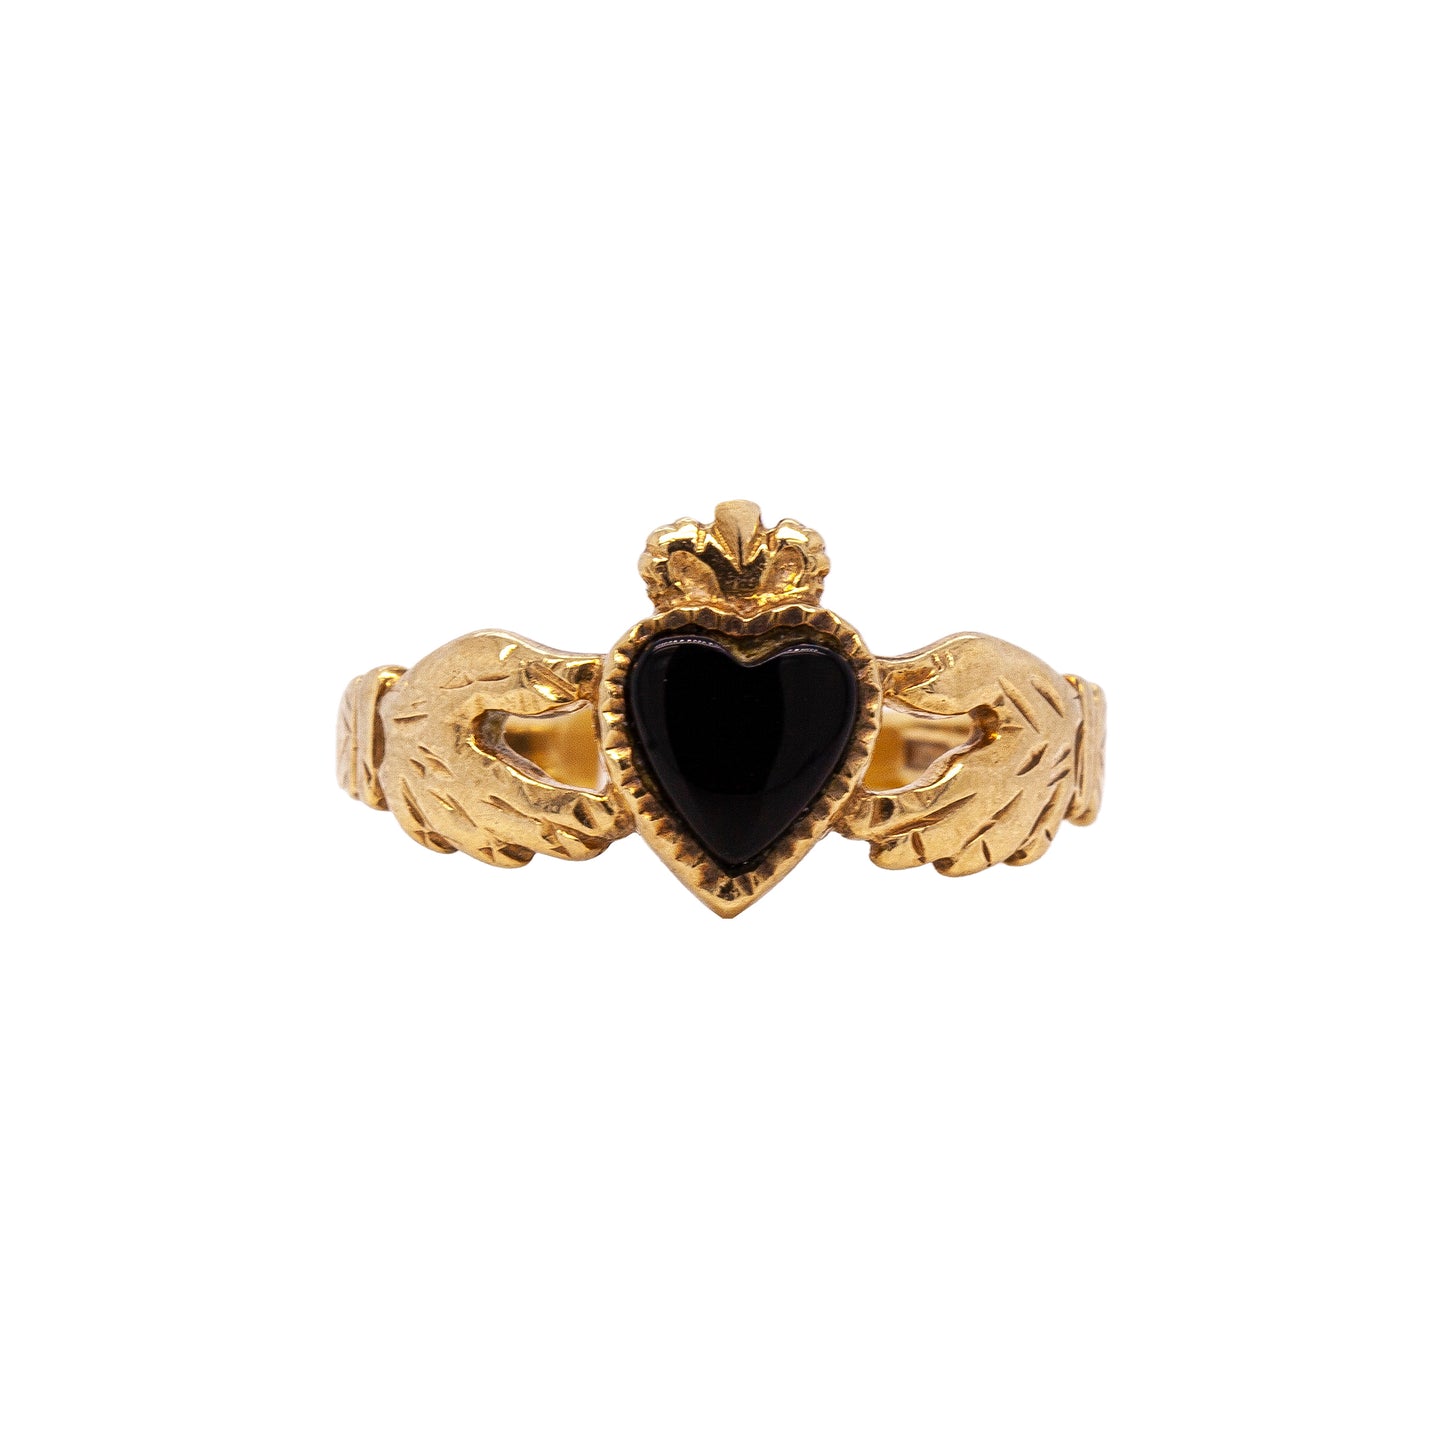 9 Carat Yellow Gold and Onyx Claddagh Ring